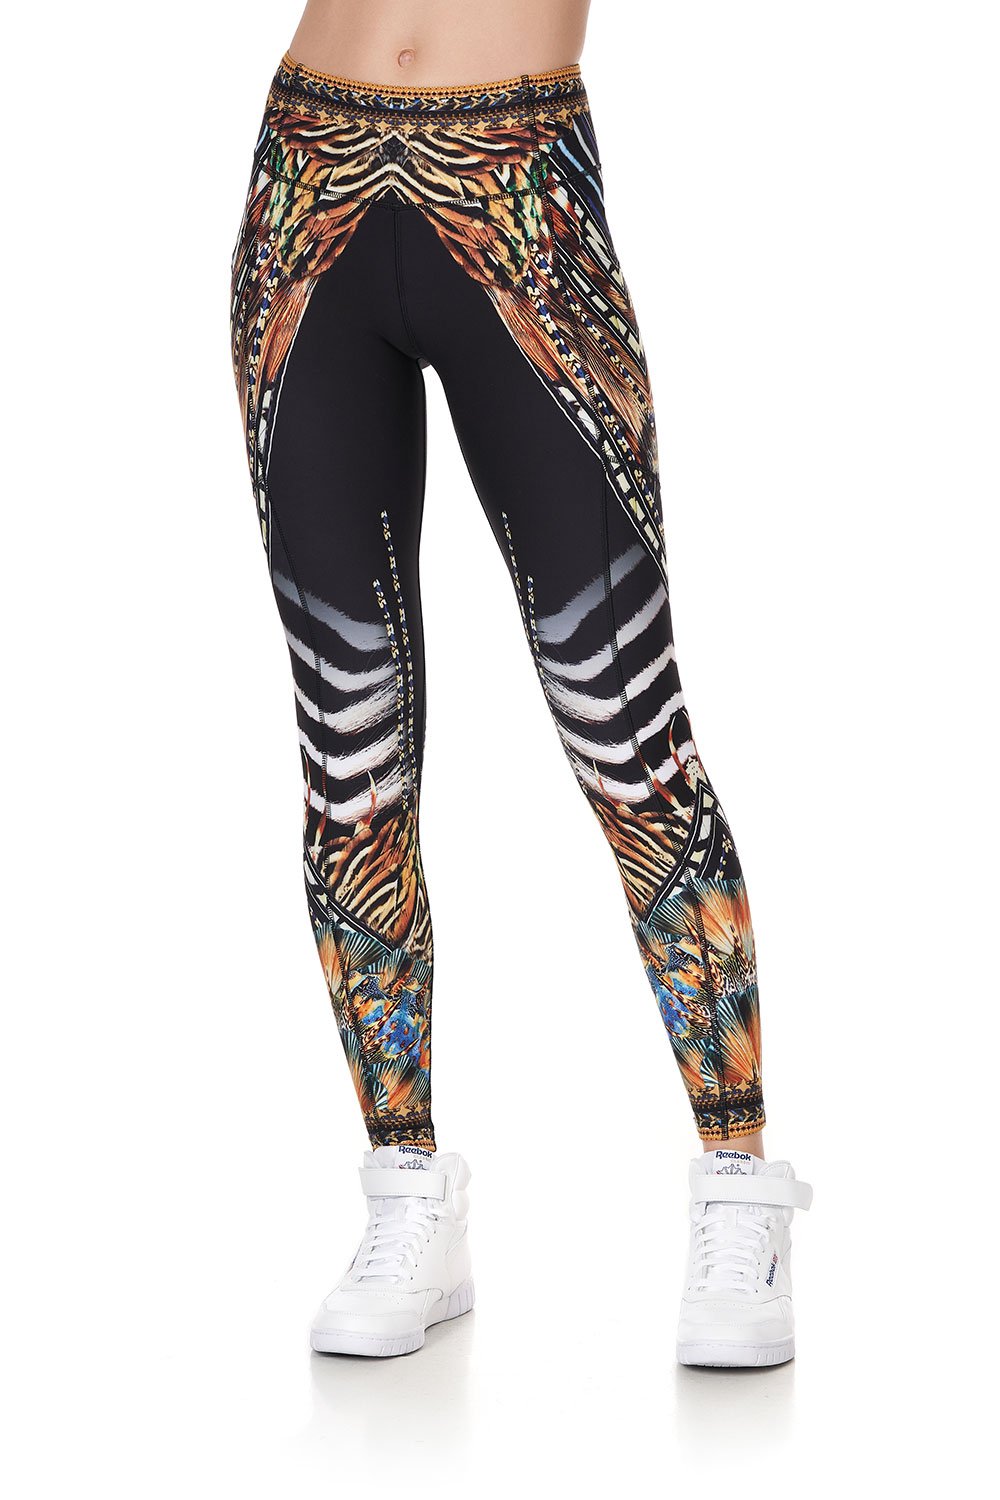 ACTIVE LEGGING WITH SIDE POCKET LOST PARADISE